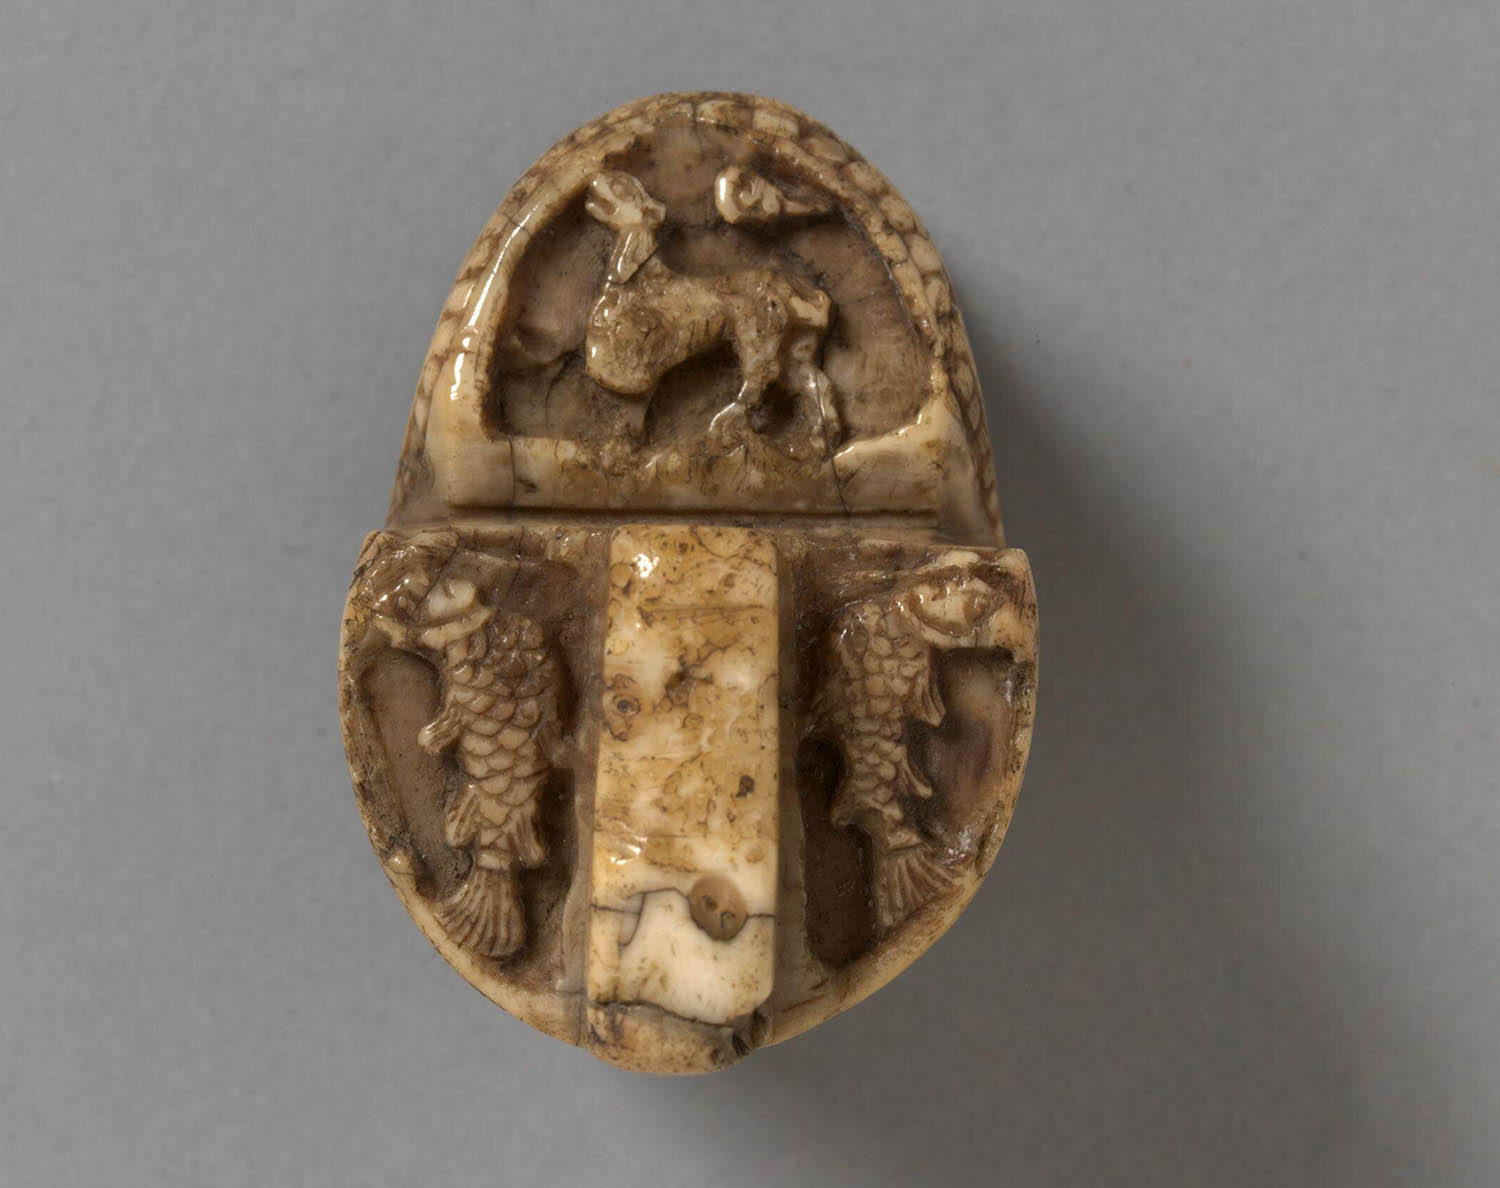 Top of a chess piece decorated with human figures, animals, and ornament.